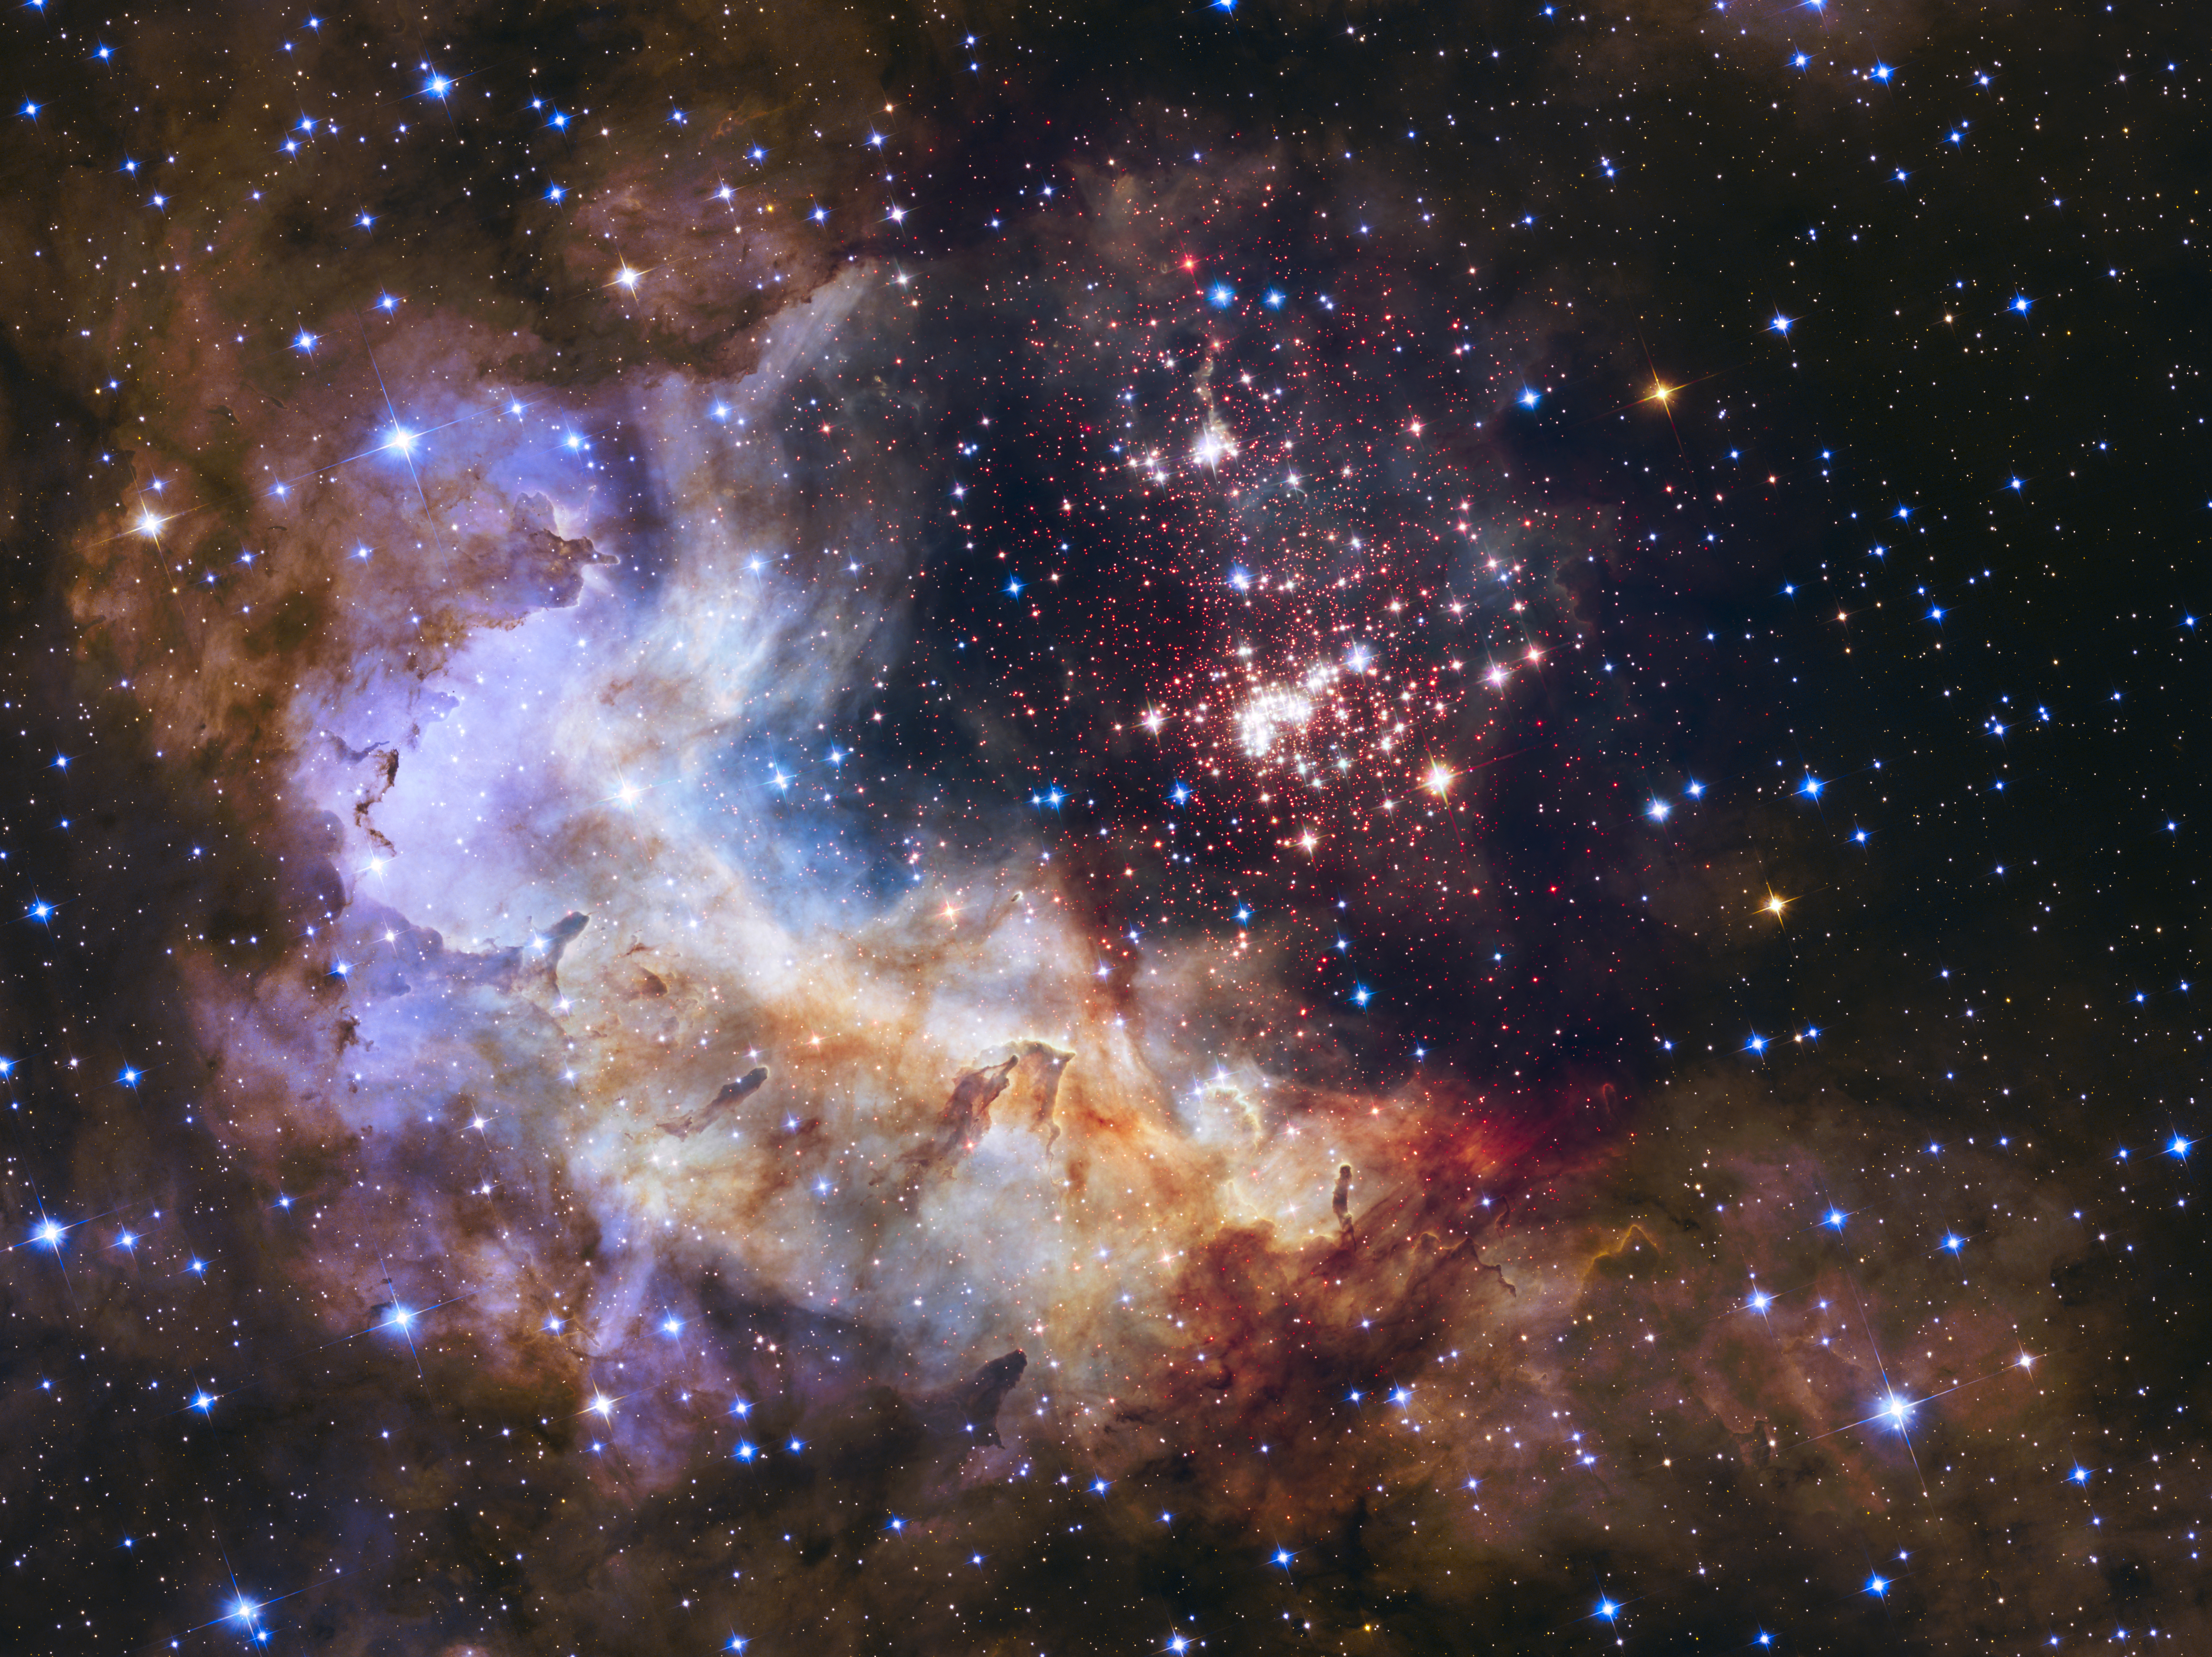 Star Cluster Westerlund 2 in Nebula Gum 29 - Hubble Space Telescope by NASA